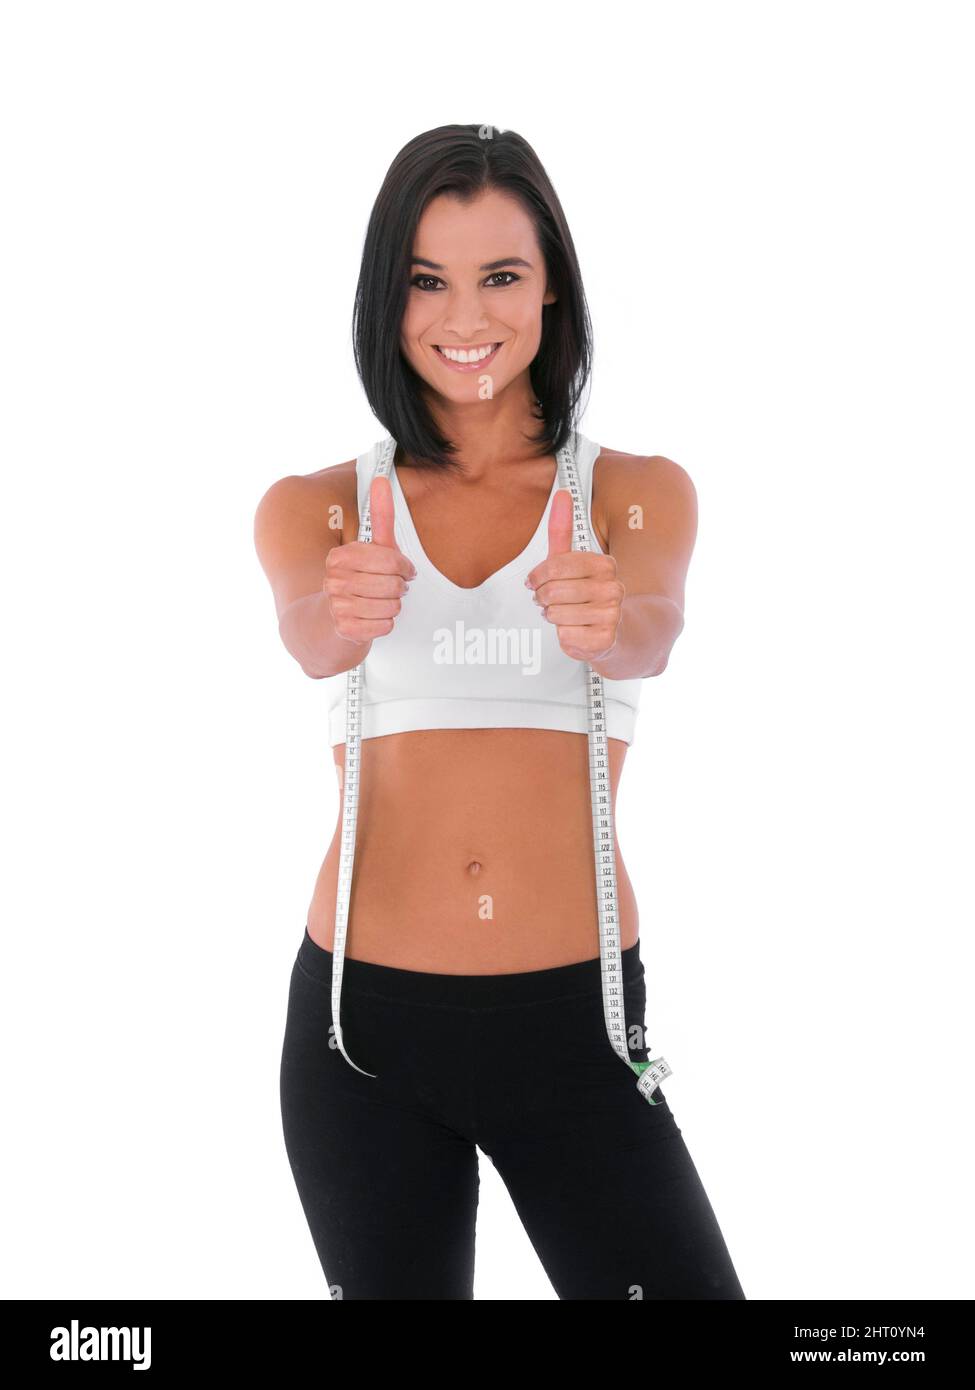 I did it - Fitness Weight loss. A fit young woman giving two thumbs up while isolated on white with a measuring tape around her neck. Stock Photo